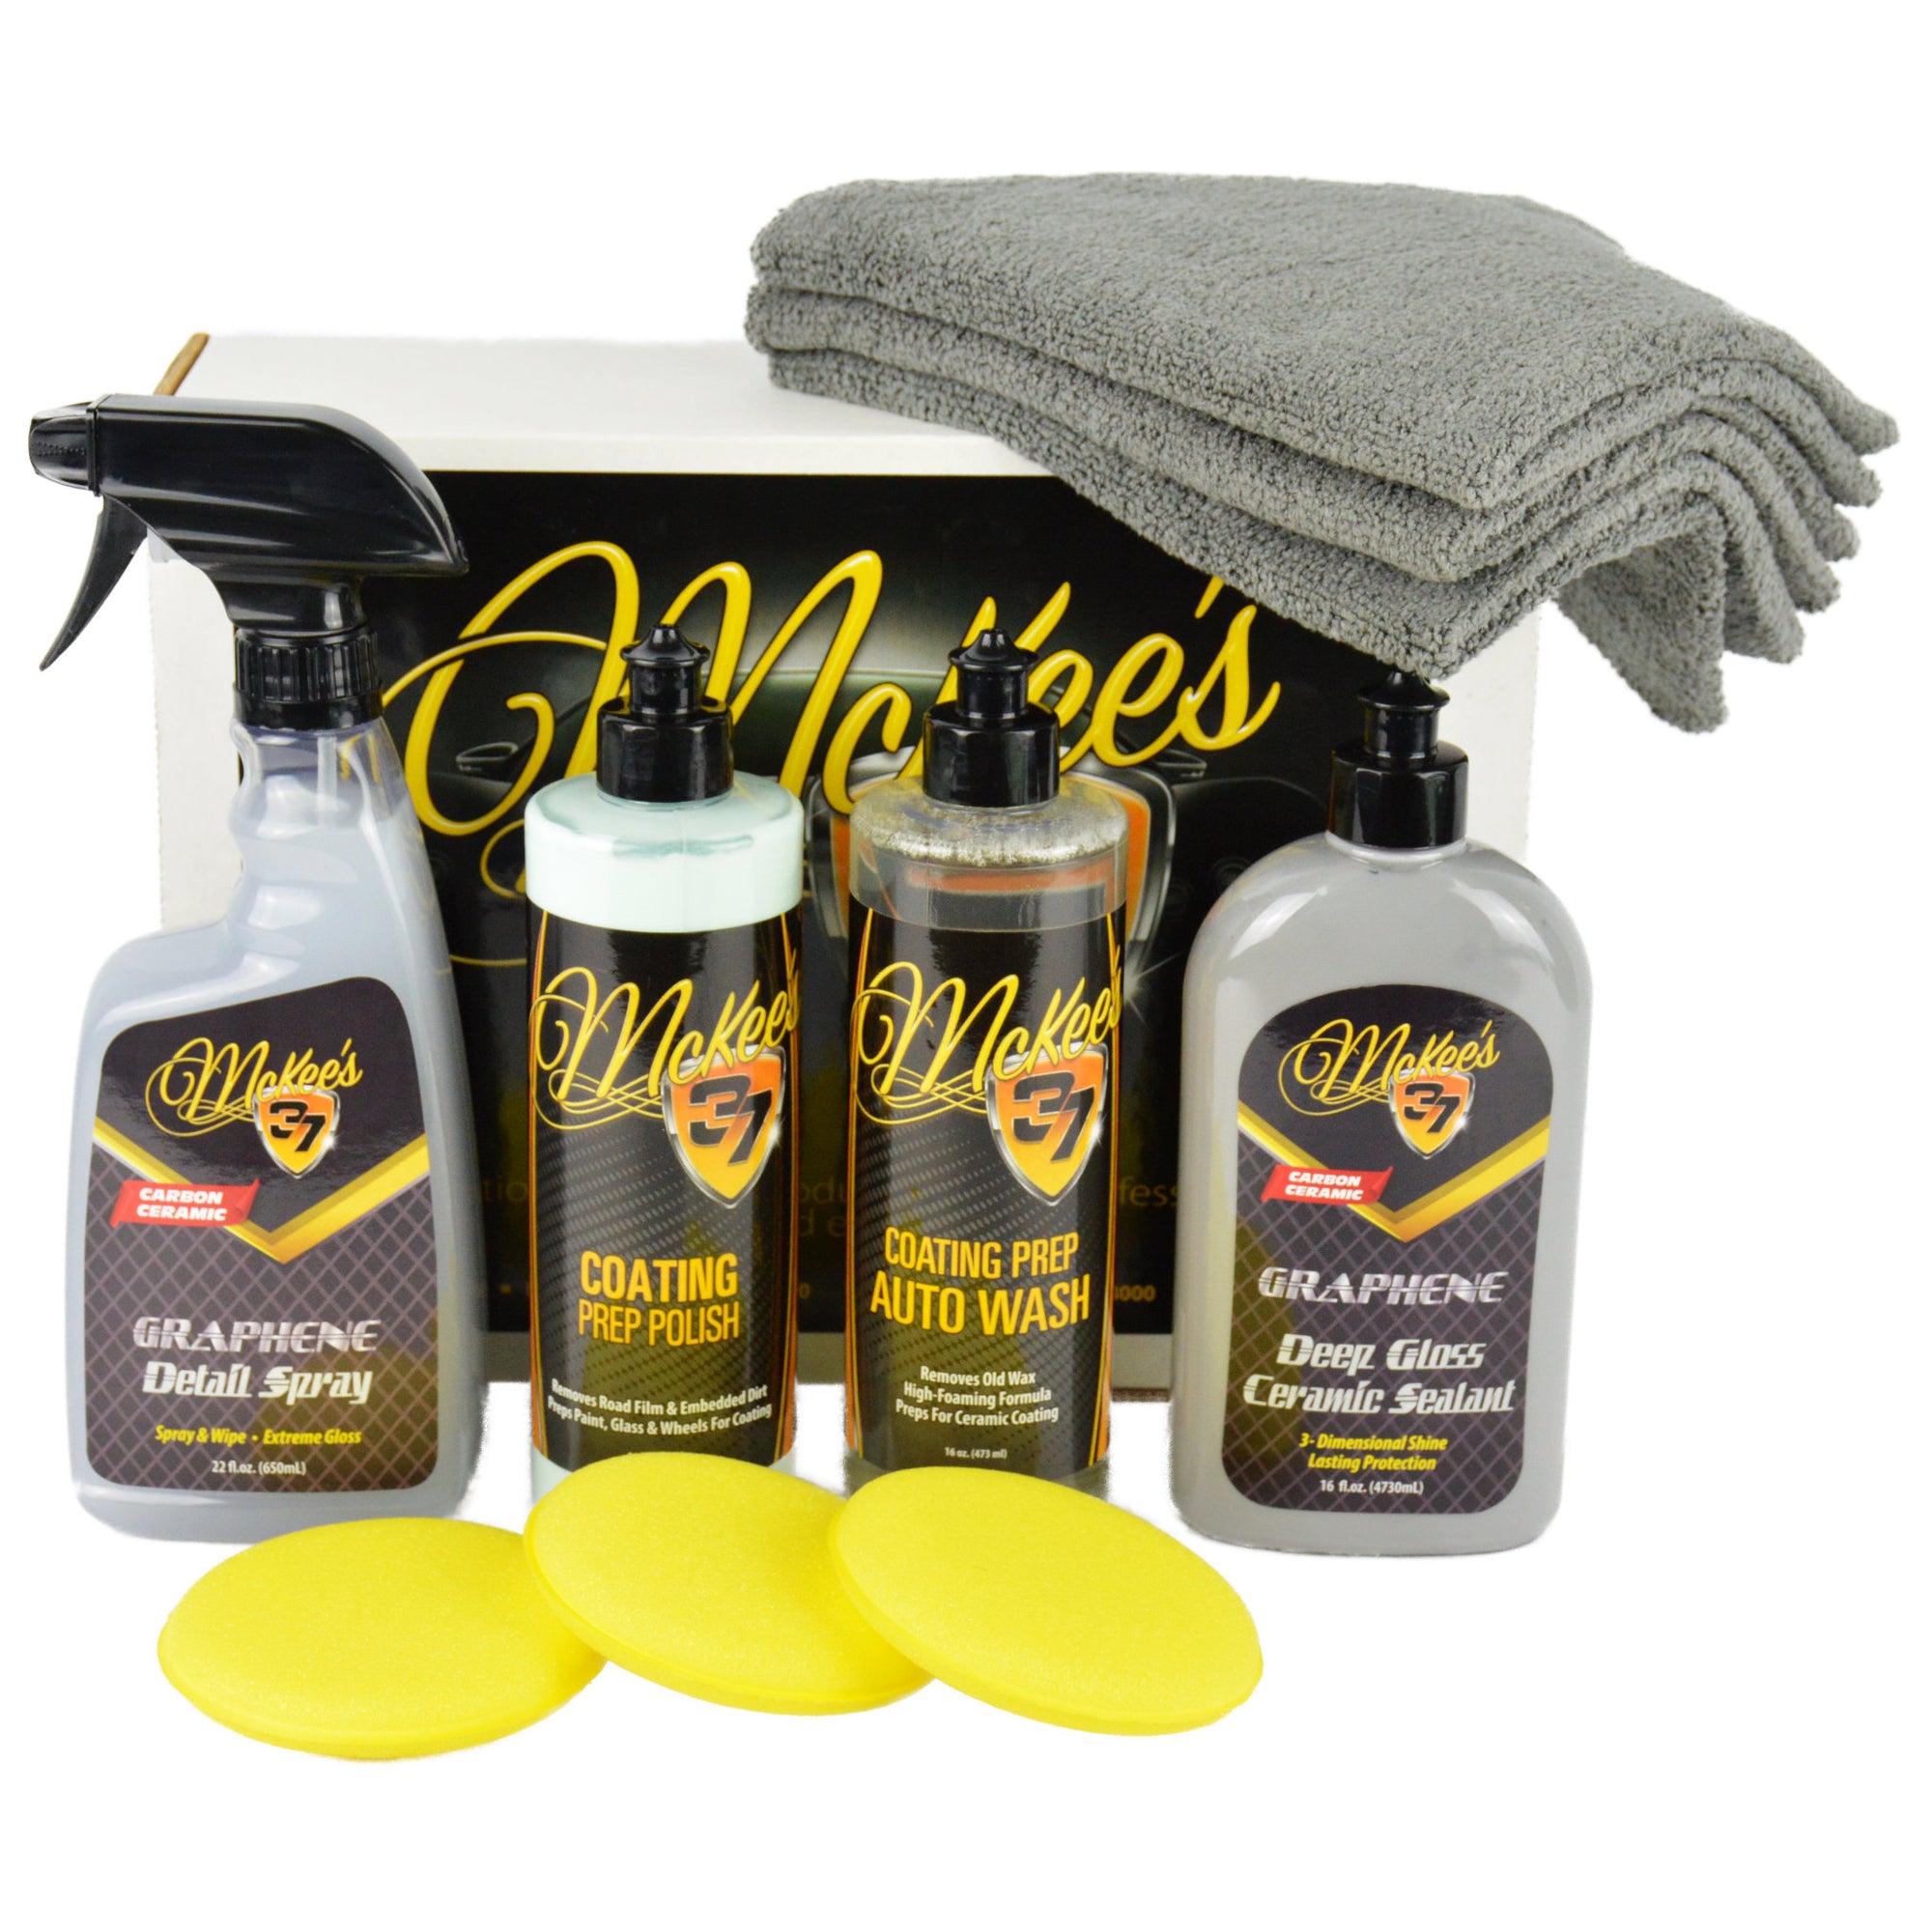 McKee's 37 MK37-7200 Universal Detailing Clay and Lube Combo